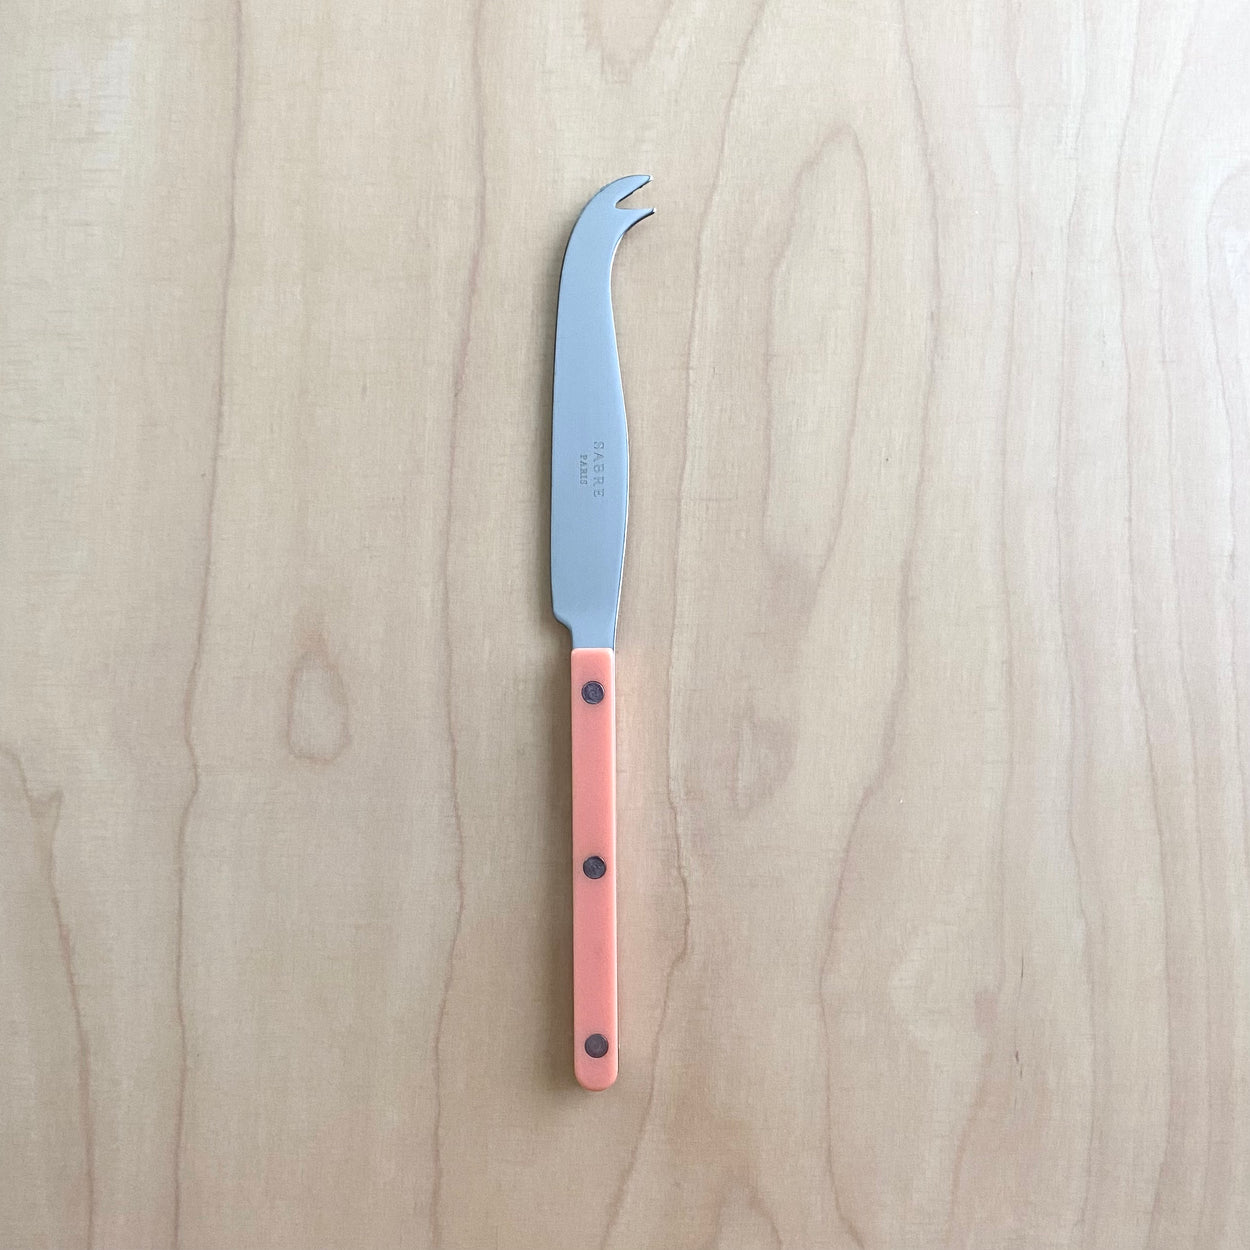 Sabre Bistrot Cheese Knife in Nude Pink